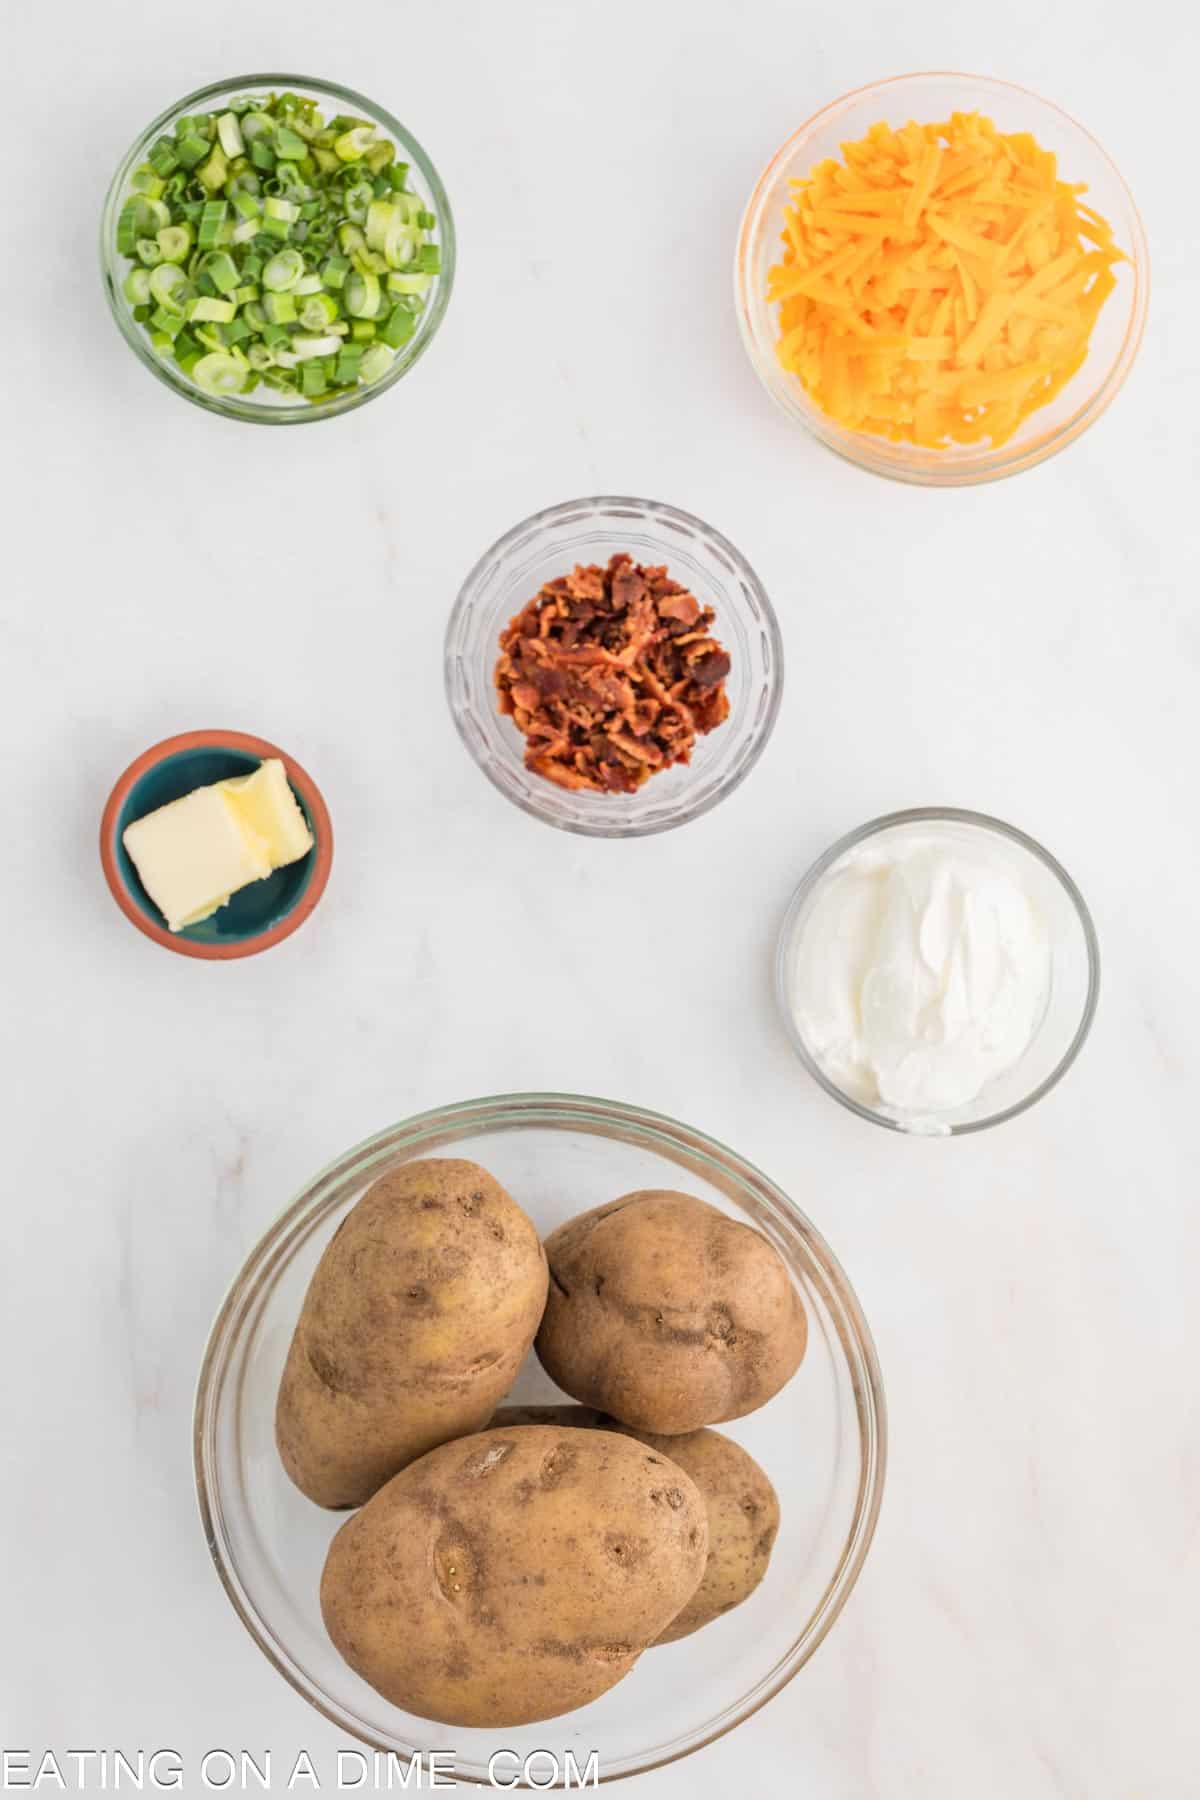 10-Minute Microwave Baked Potatoes - Family Food on the Table